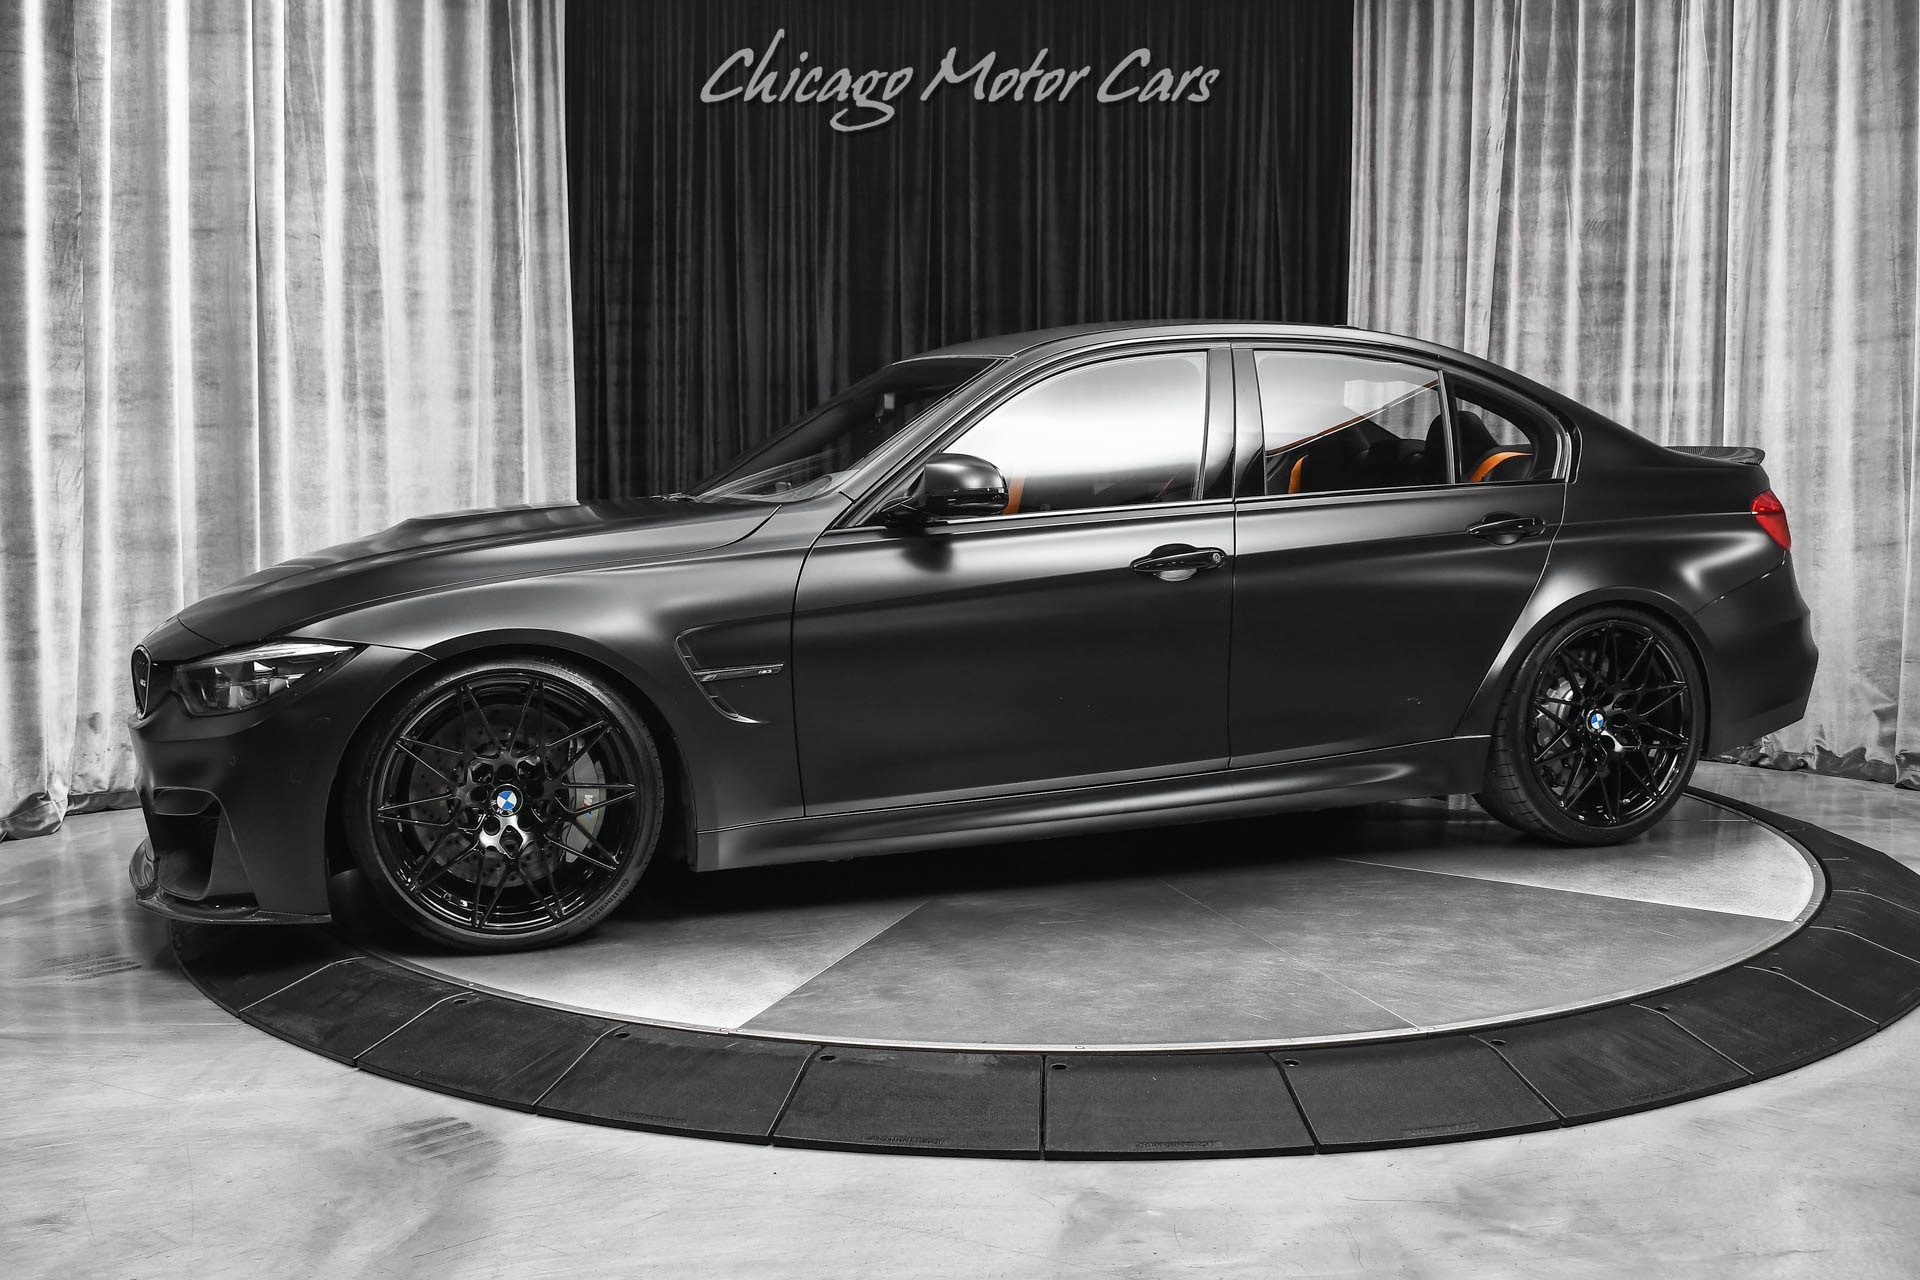 Used 2018 BMW M3 Sedan M Competition Pkg! 6-Speed Manual! FULL PPF! Carbon  Fiber! LOADED For Sale (Special Pricing) | Chicago Motor Cars Stock #19464A